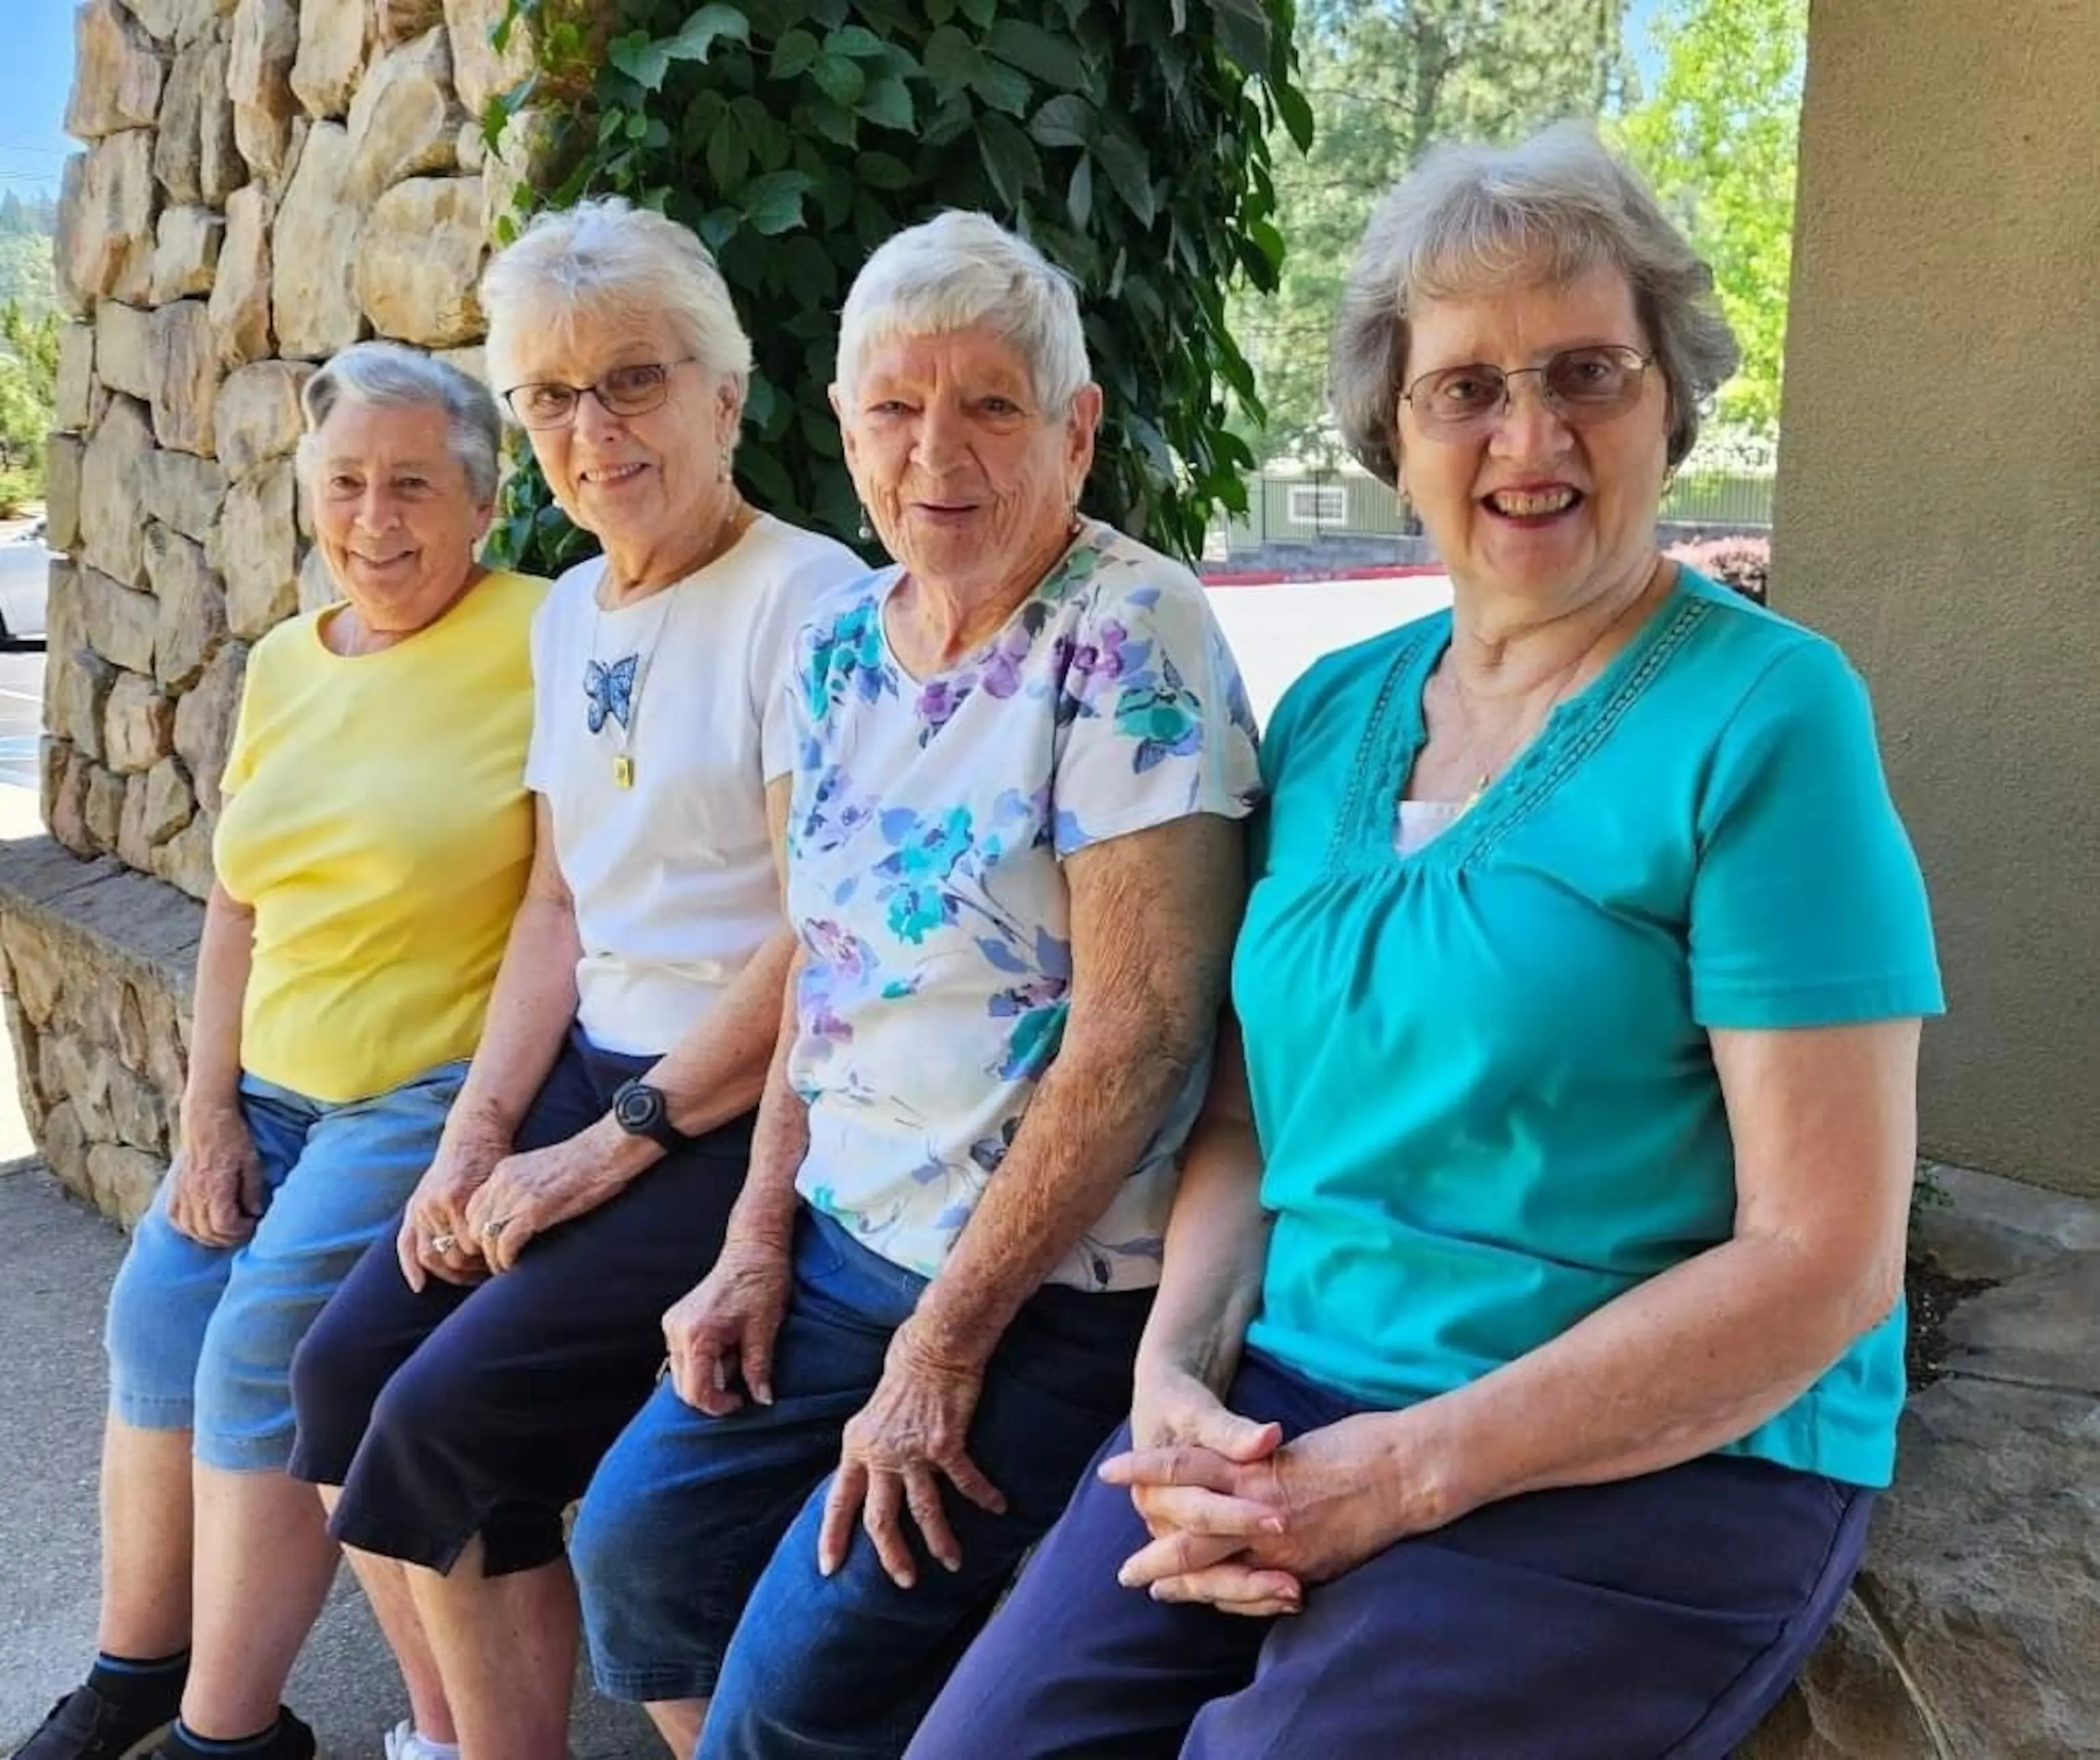 PHOTO: Mary Grace Tassone, Joan Harris, Elsie Webb and Sylvia Crane, pictured left to right, all attended the same high school.